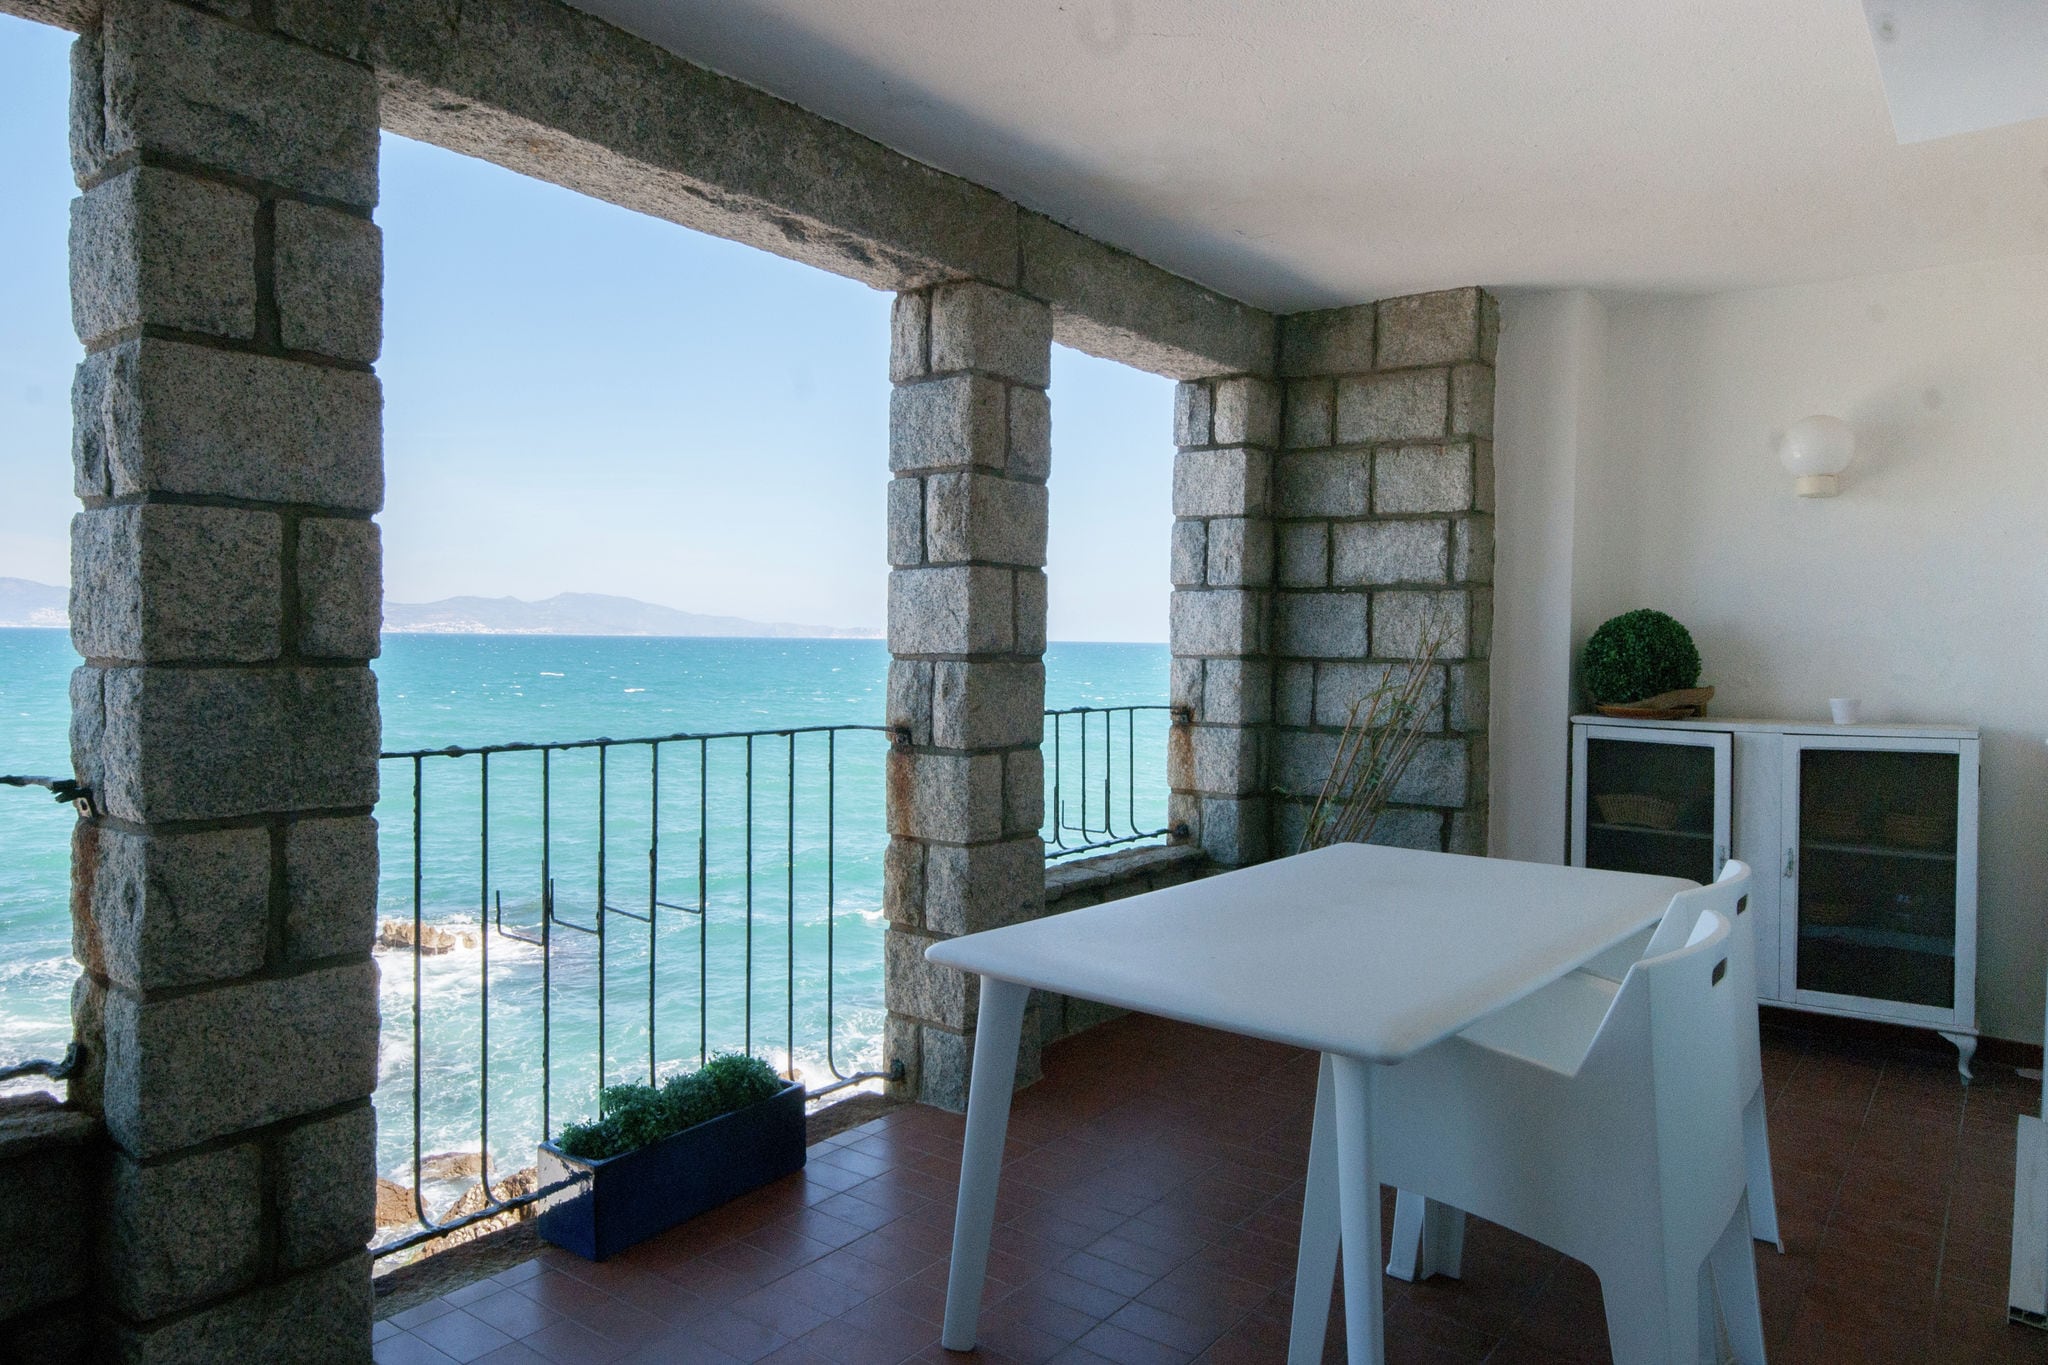 Luxury Apartment in L'Escala Catalonia with Beach nearby